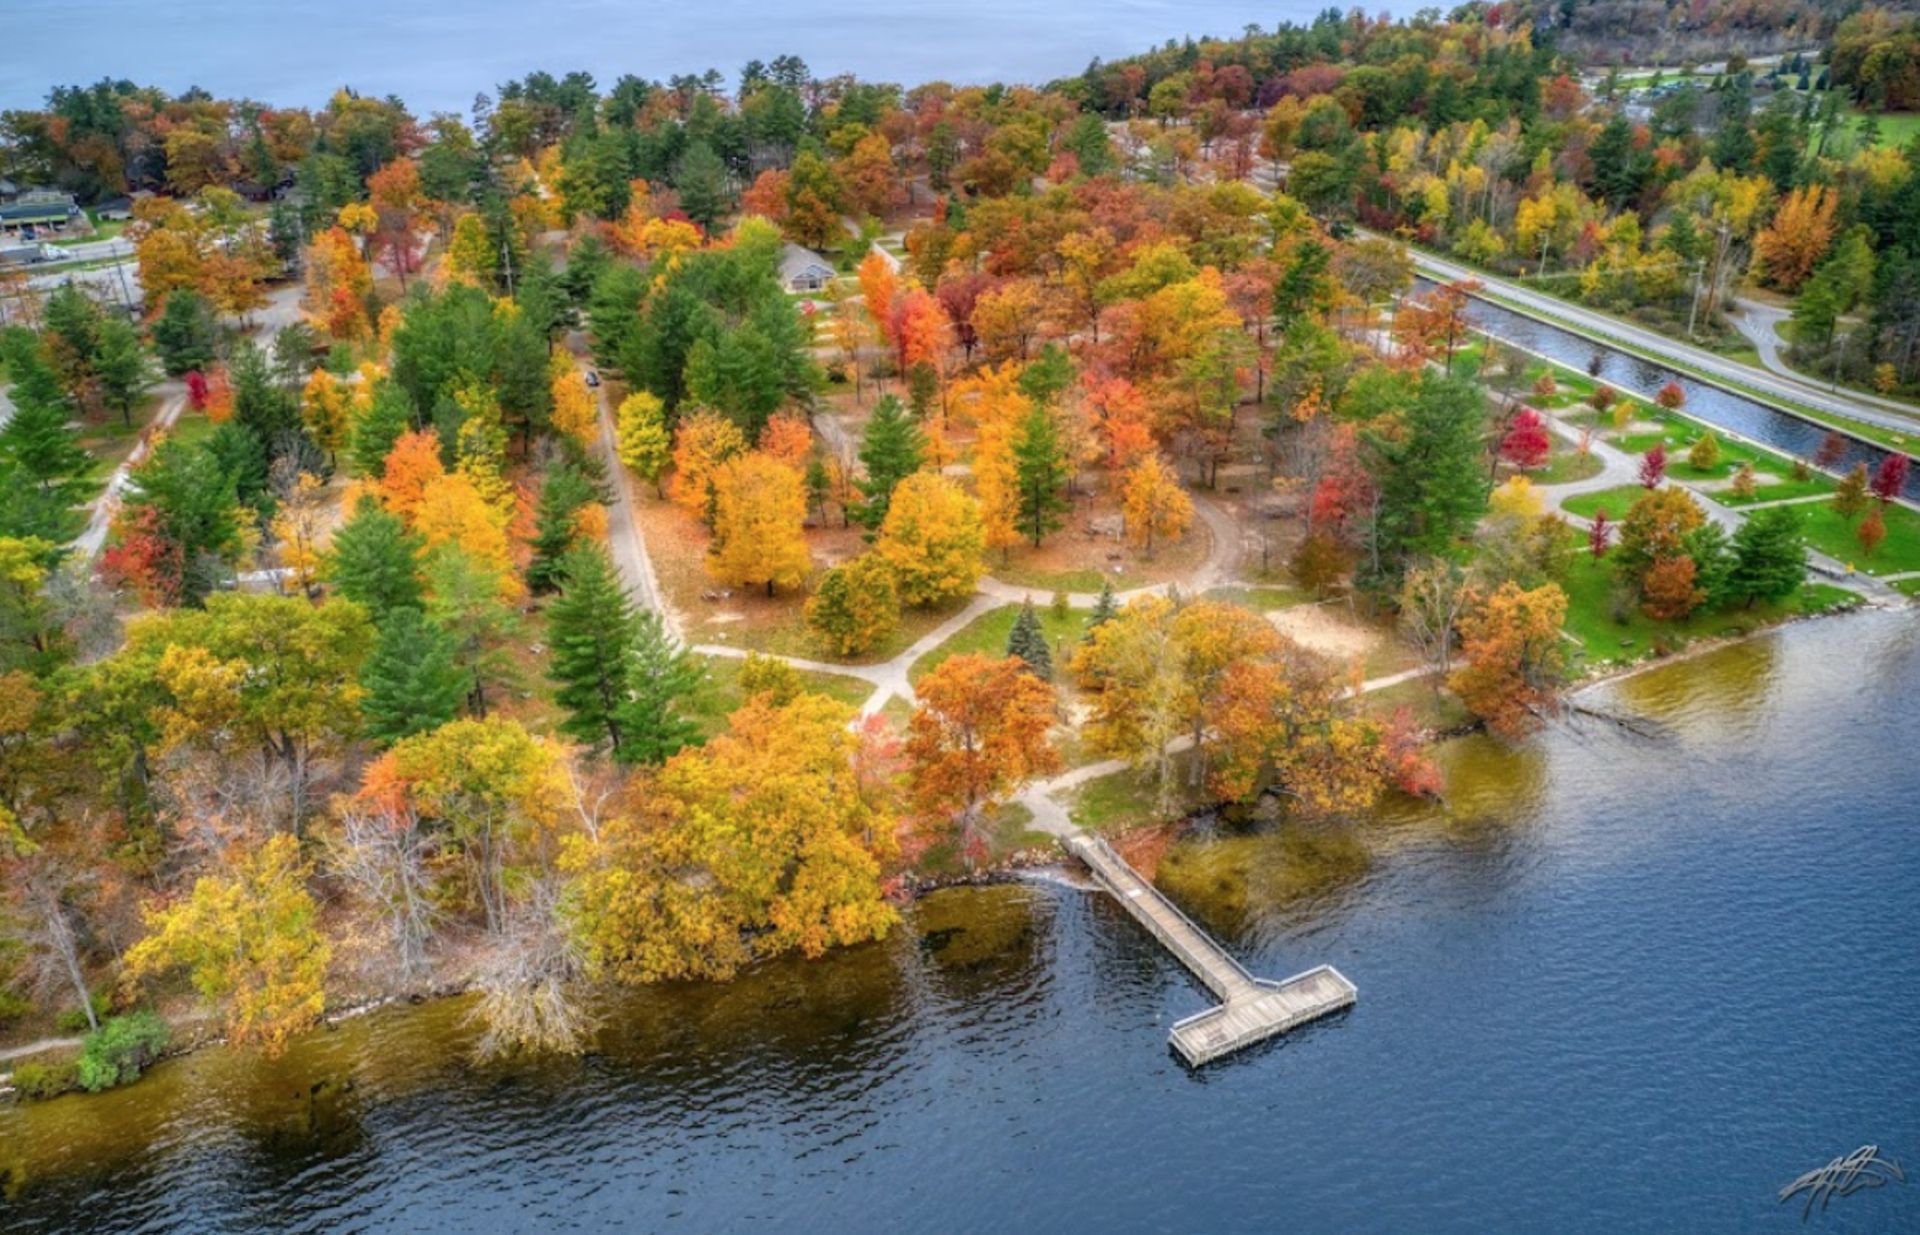 Get Lost in the Colors of Fall by Michigan's Lake Mitchell! - Image 11 of 15